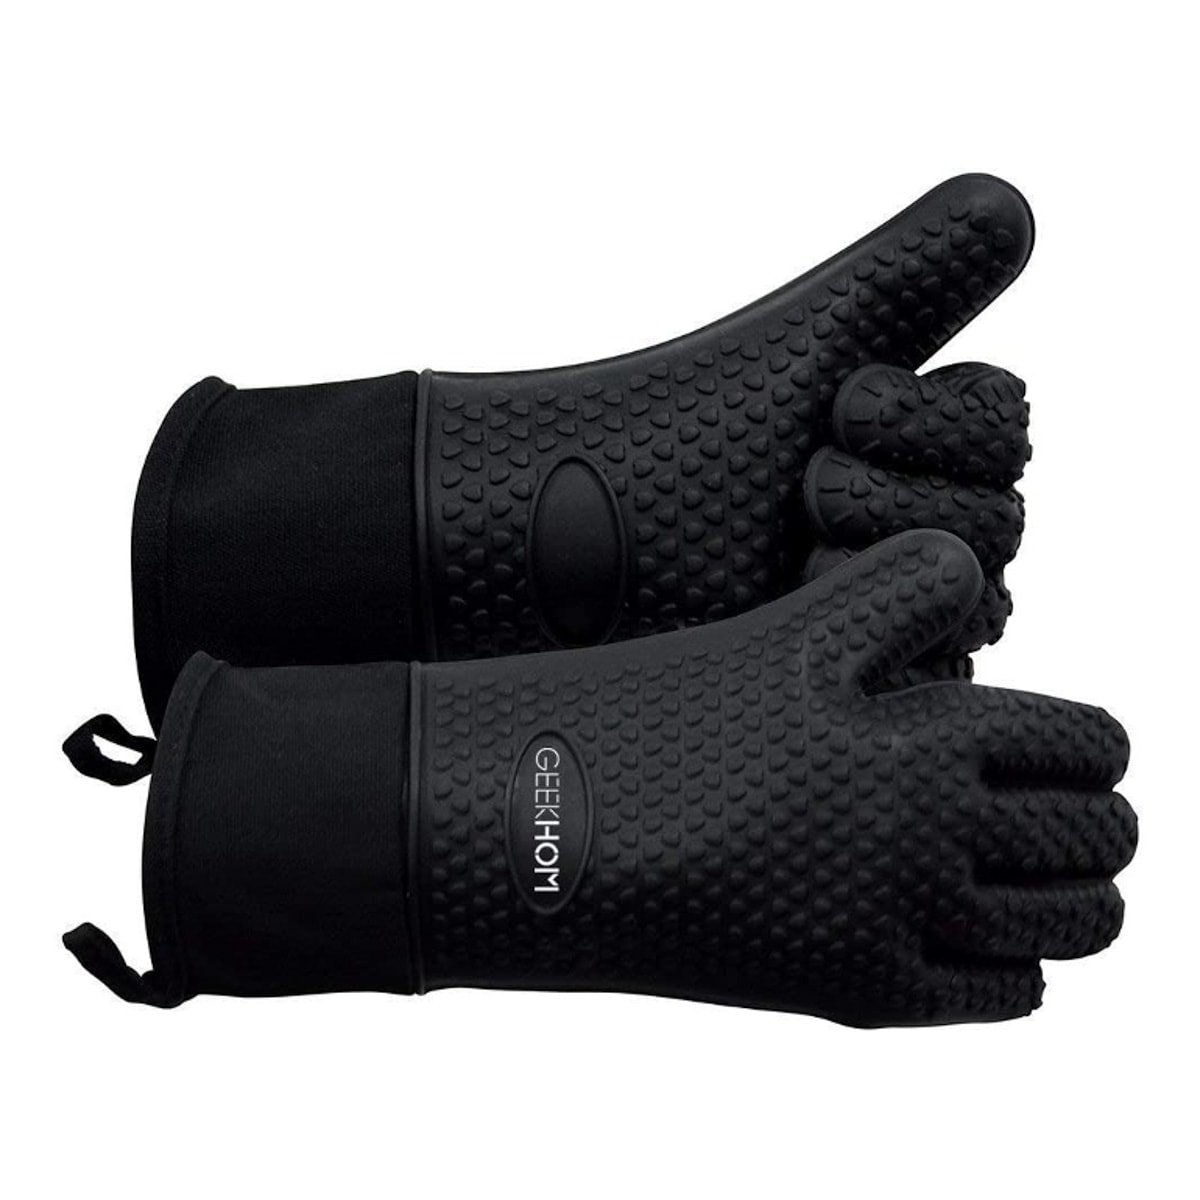 A pair of black silicone gloves that can be used around hot flames.